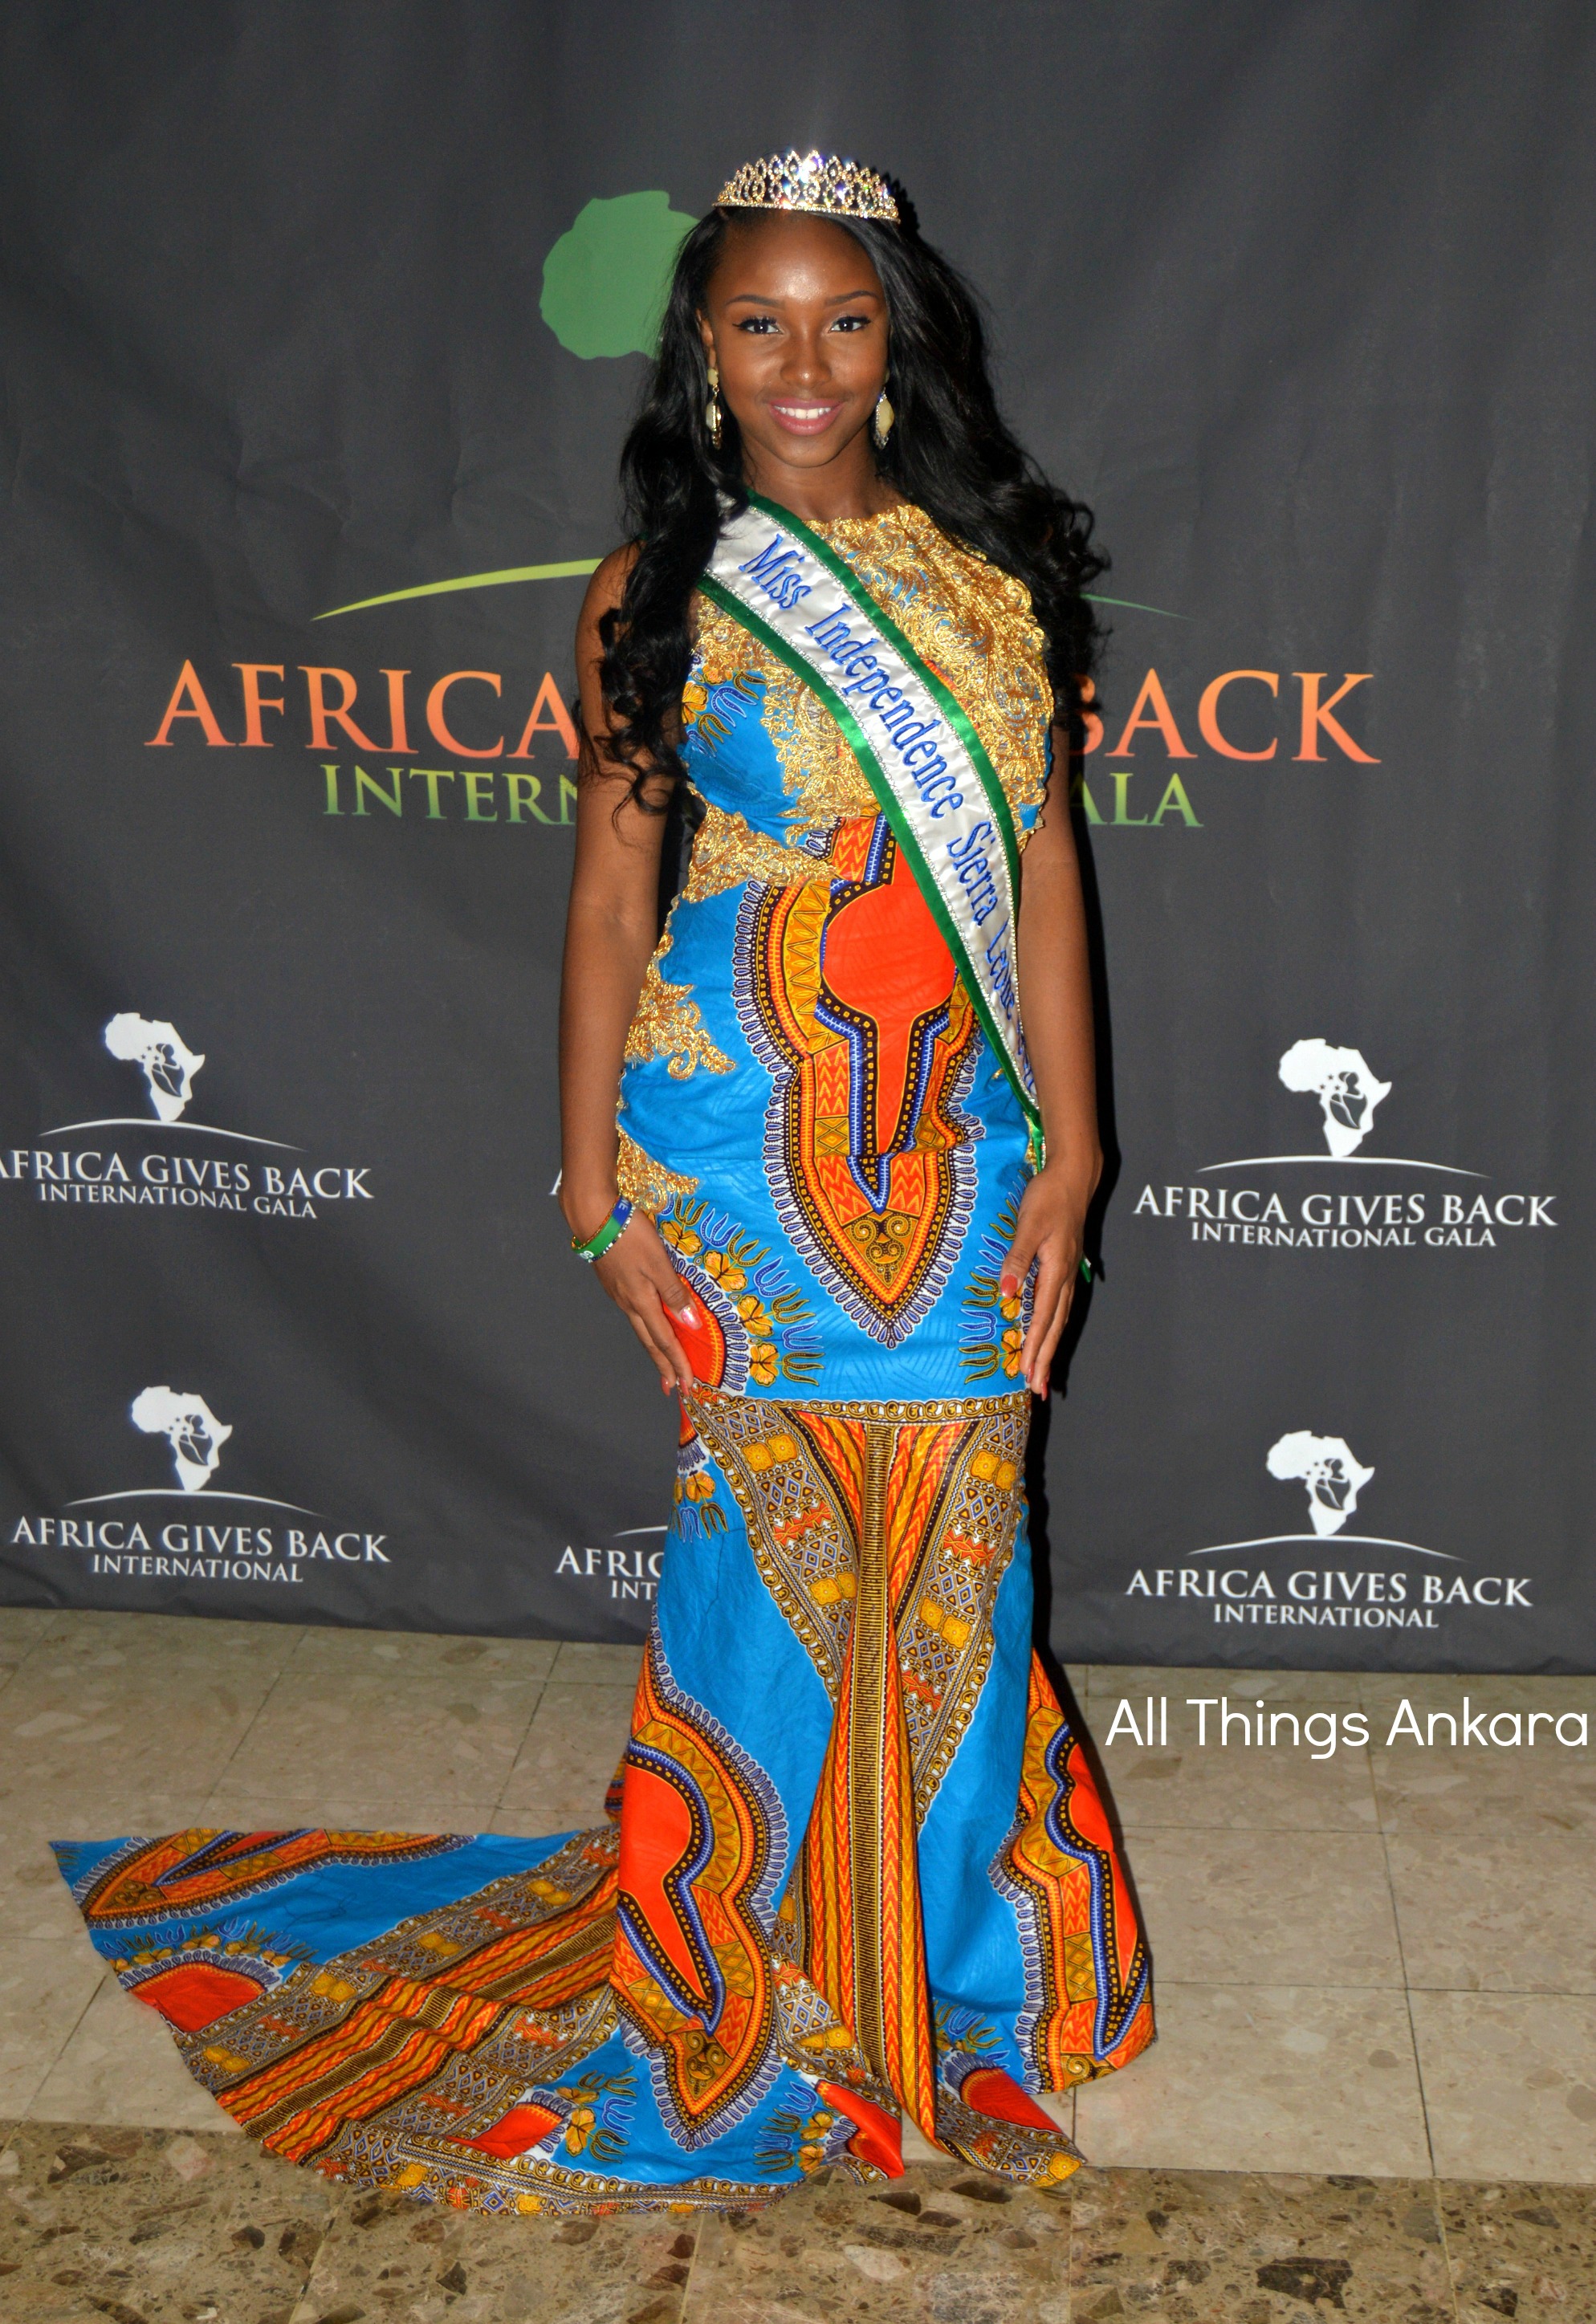 Gala-All Things Ankara's Best Dressed Women at Africa Gives Back International Gala 2016 9